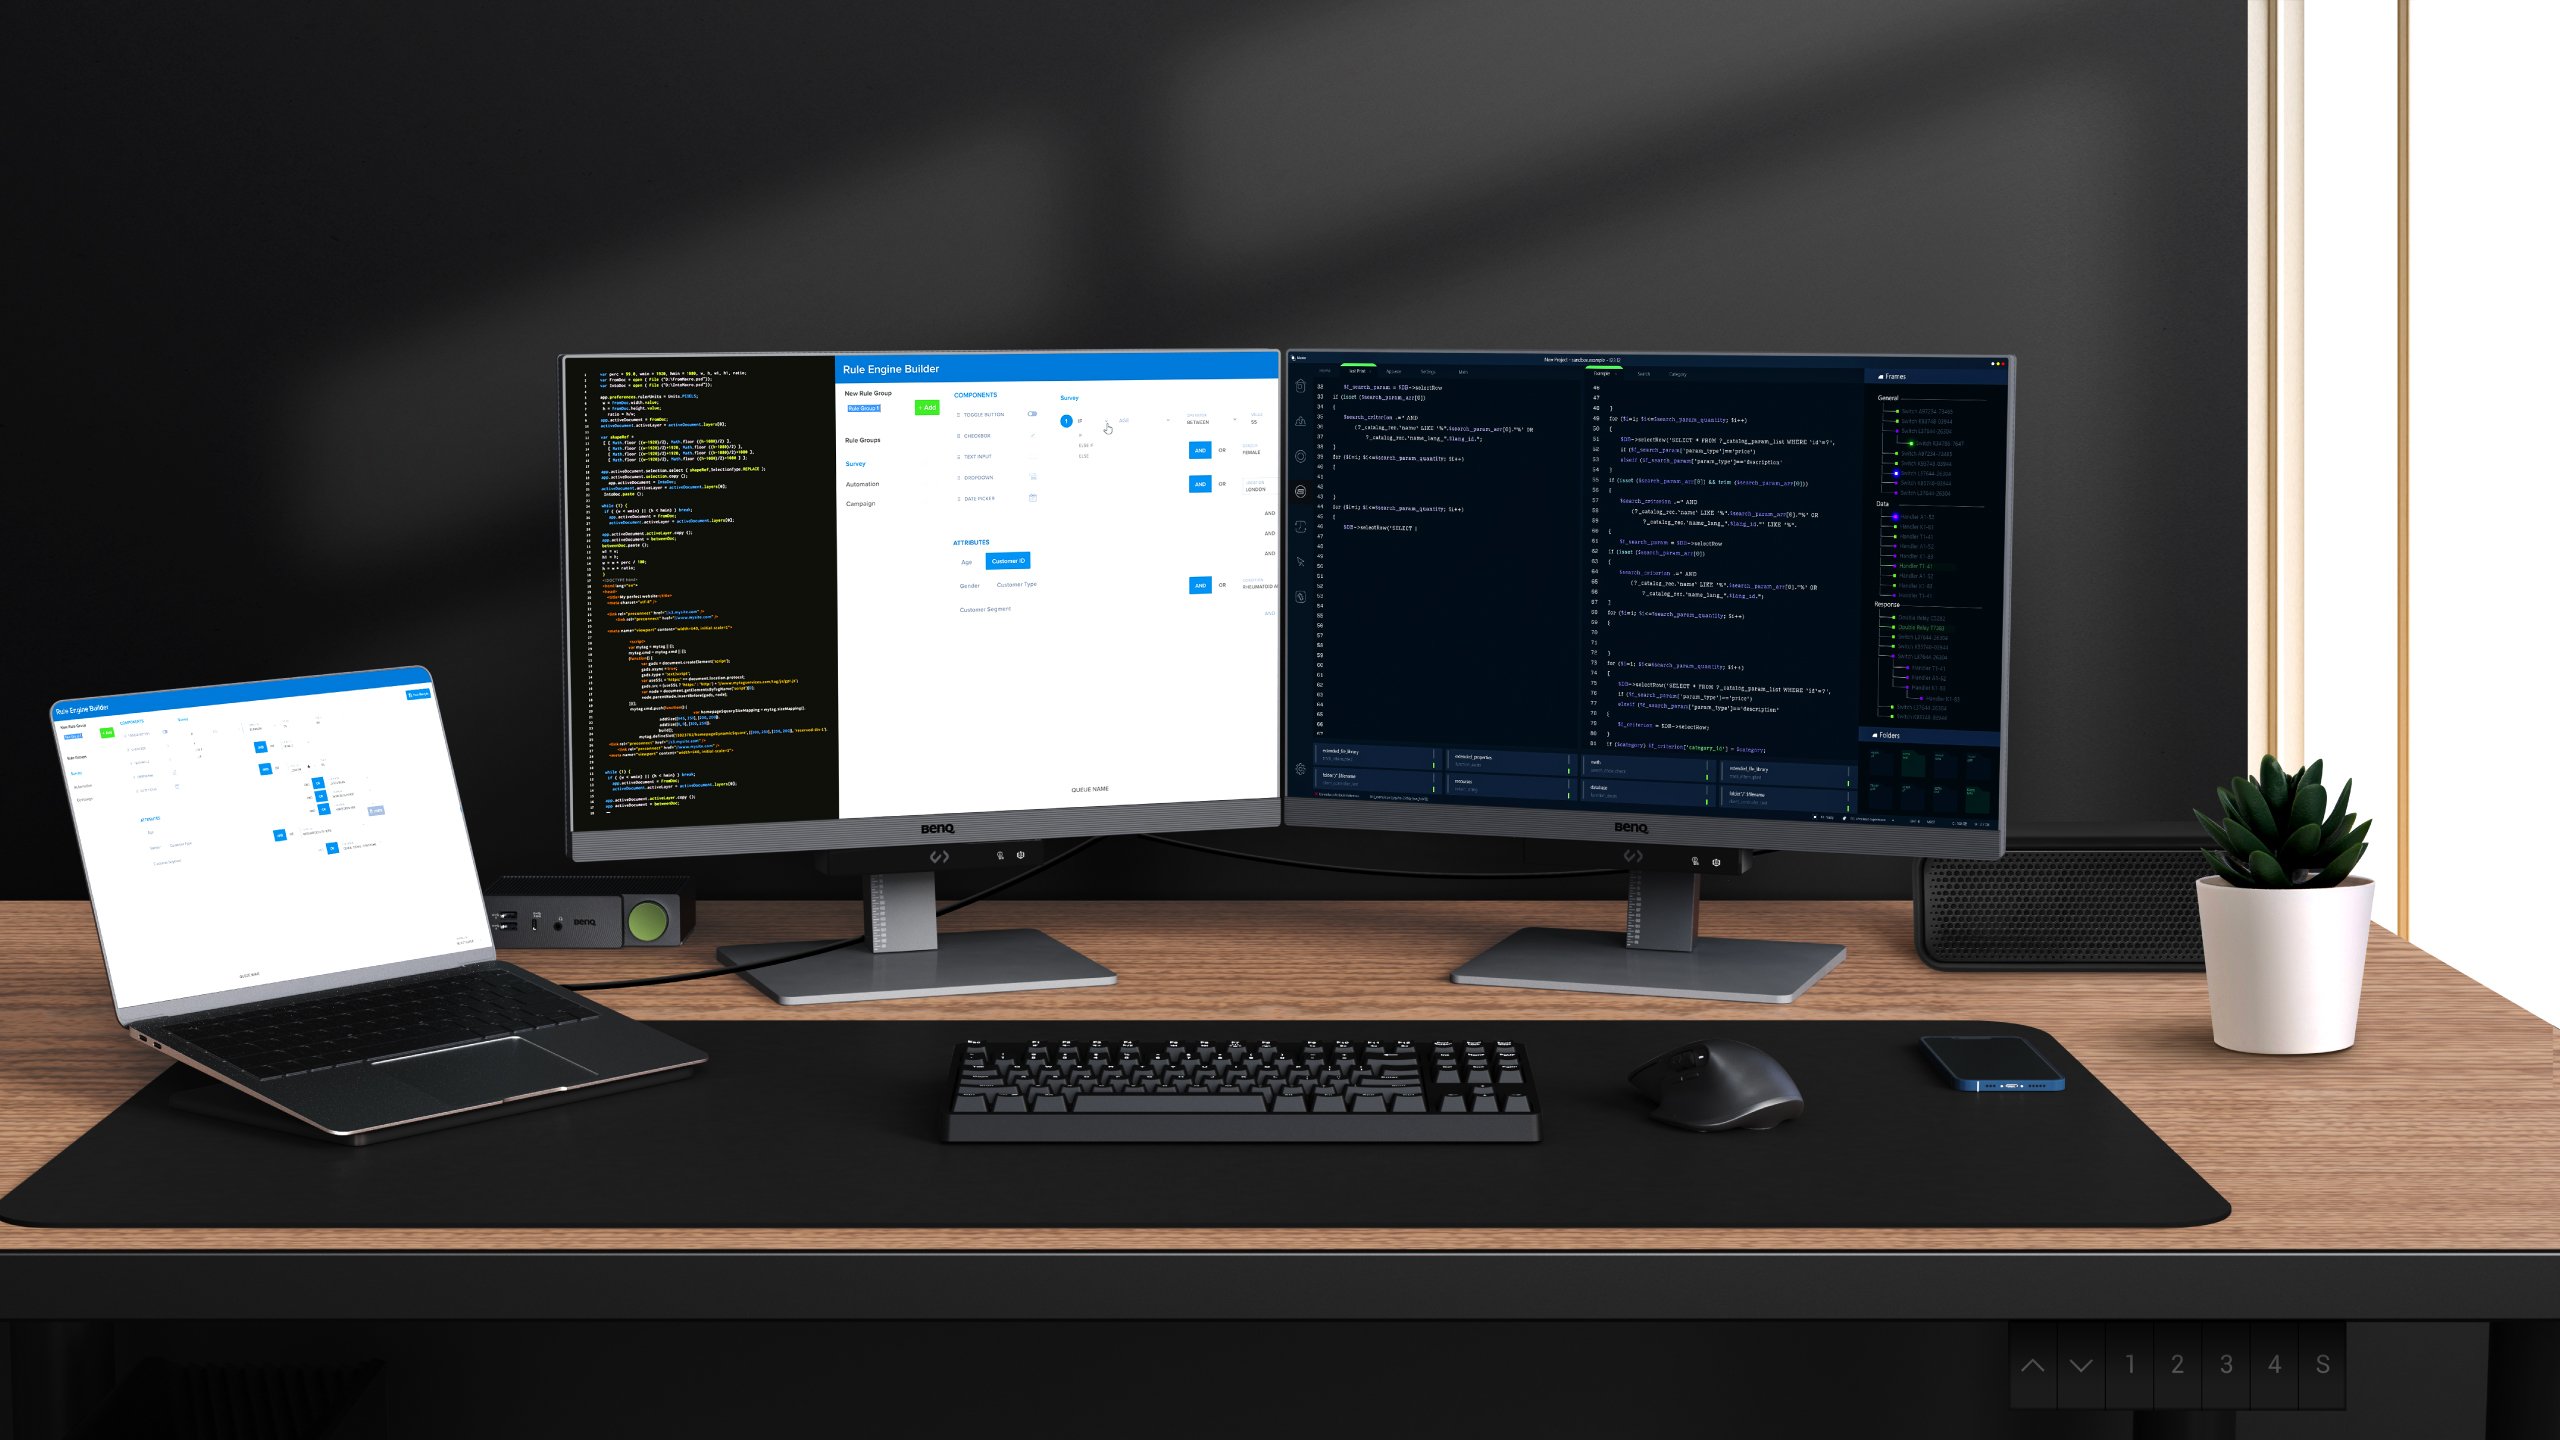 Leverage the power of USB Type-C with Multi-Stream Transport Technology to daisy-chain multiple monitors